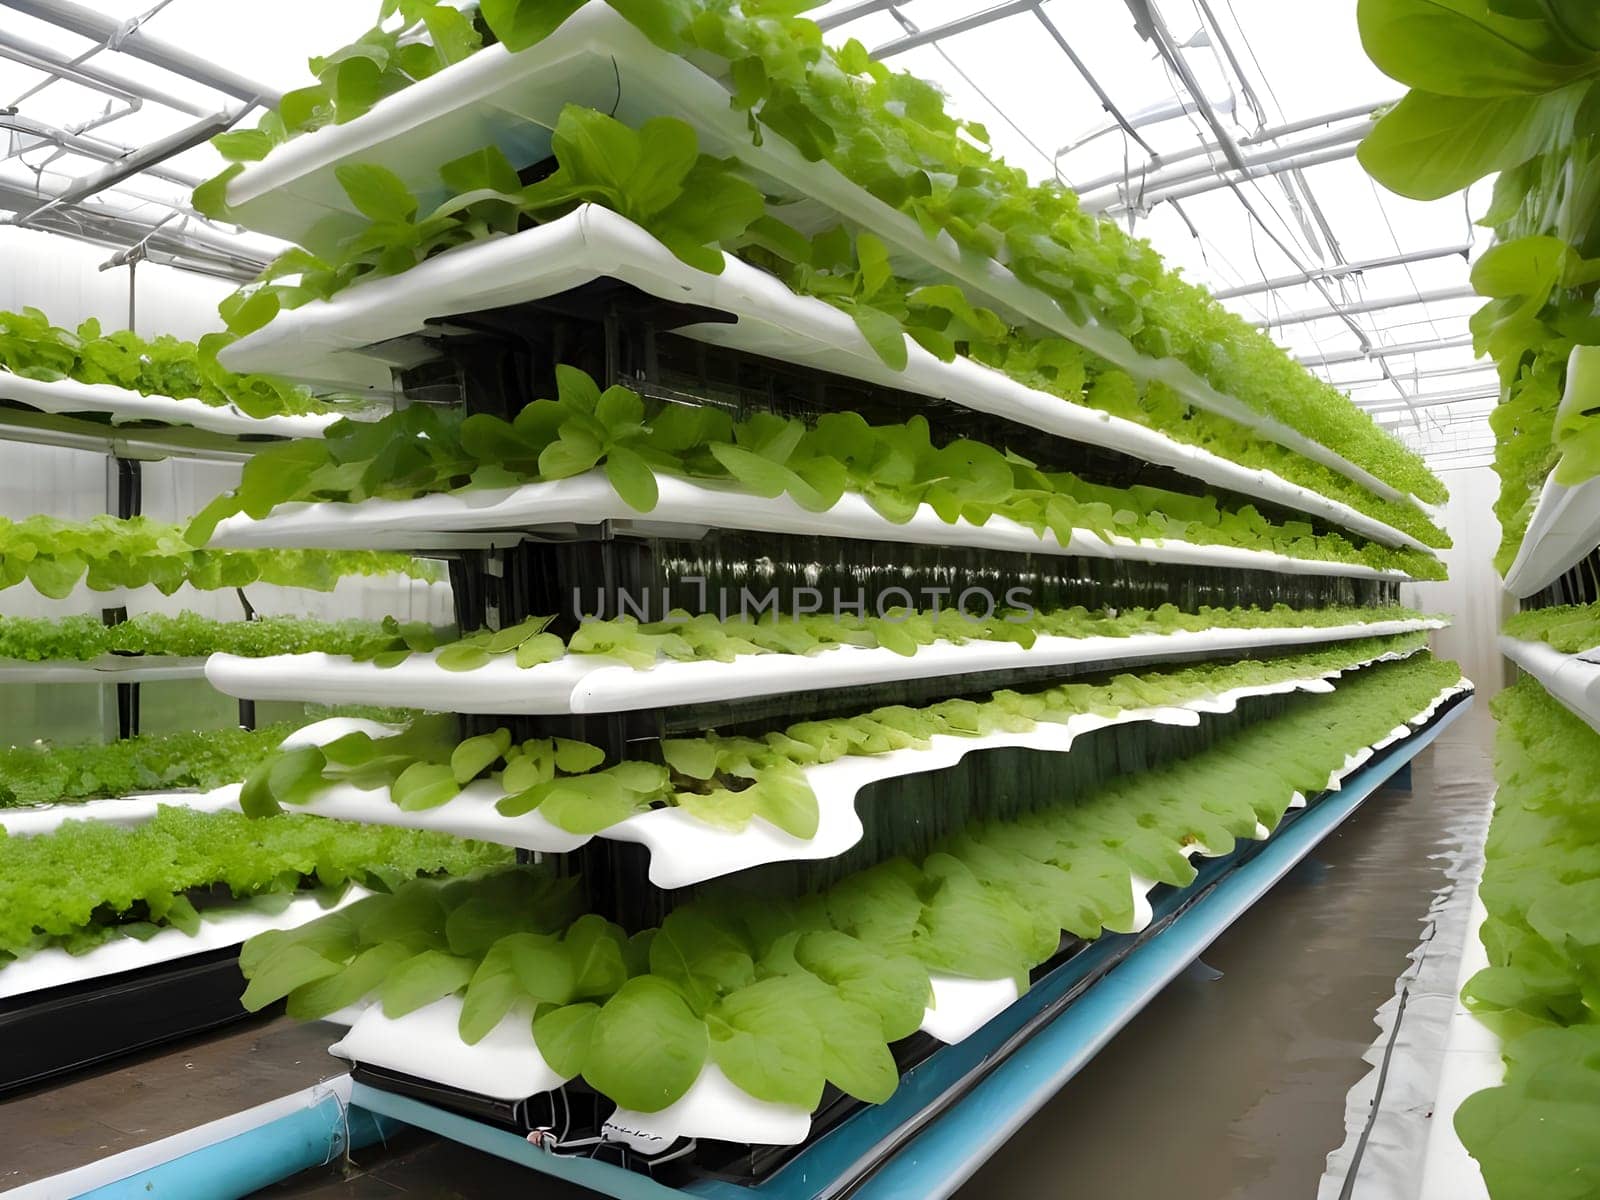 Sky-High Harvests. Exploring Vertical Farming and Hydroponic Innovations by mailos